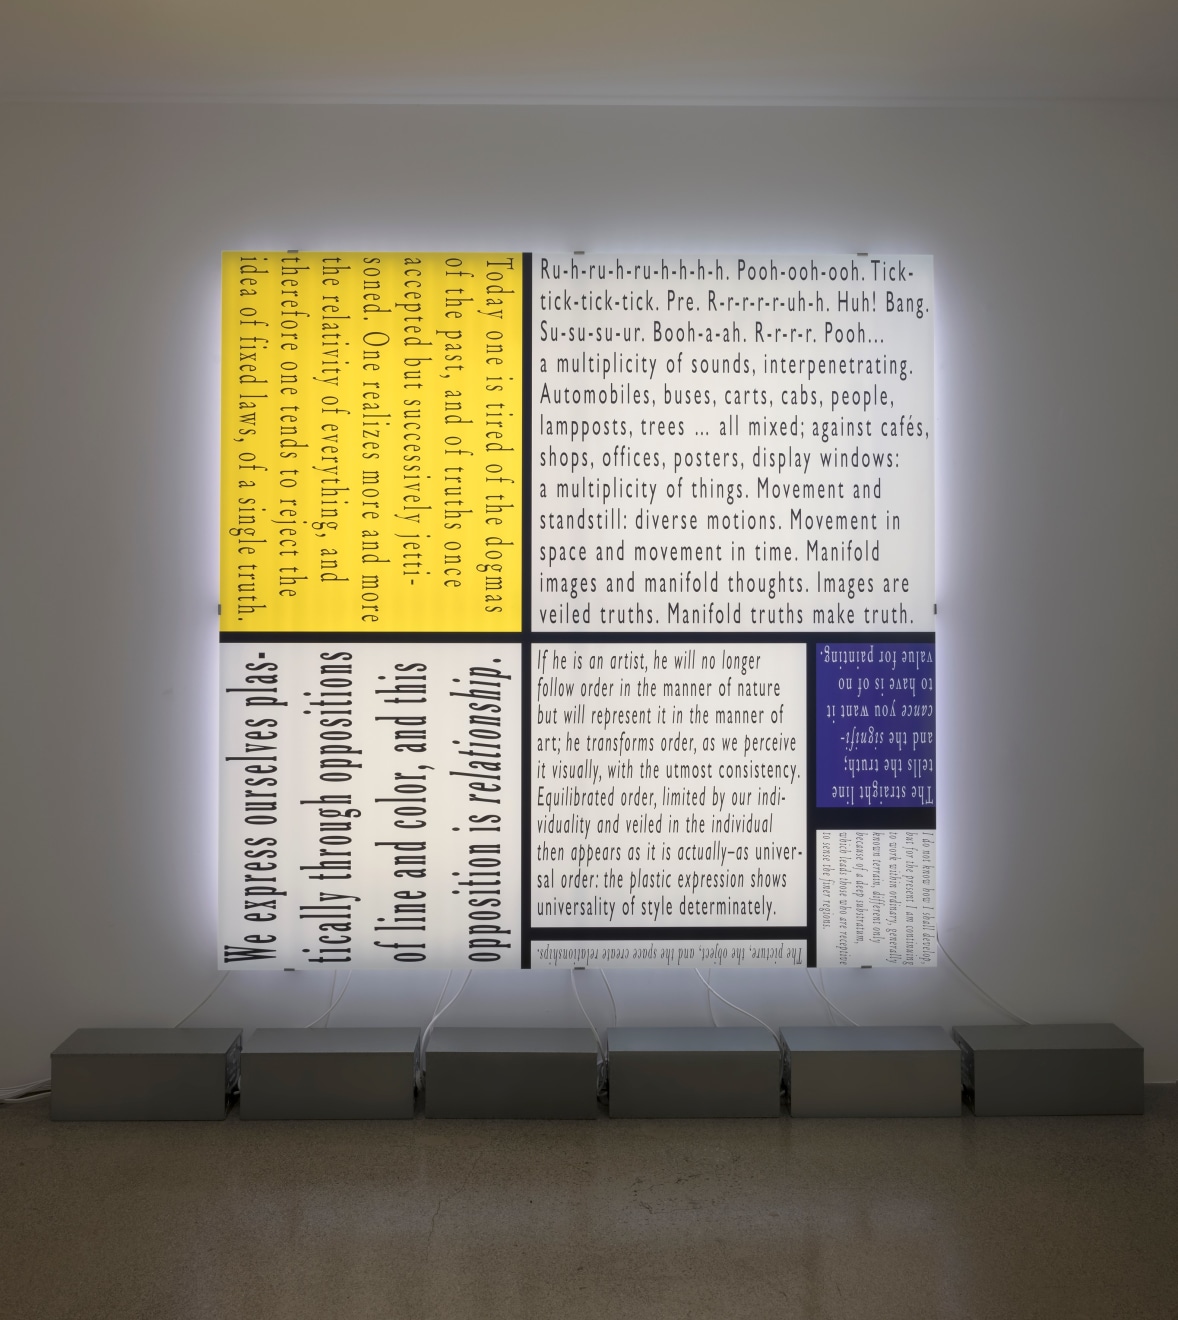 Joseph Kosuth in Re-Inventing Piet. Mondrian and the Consequences